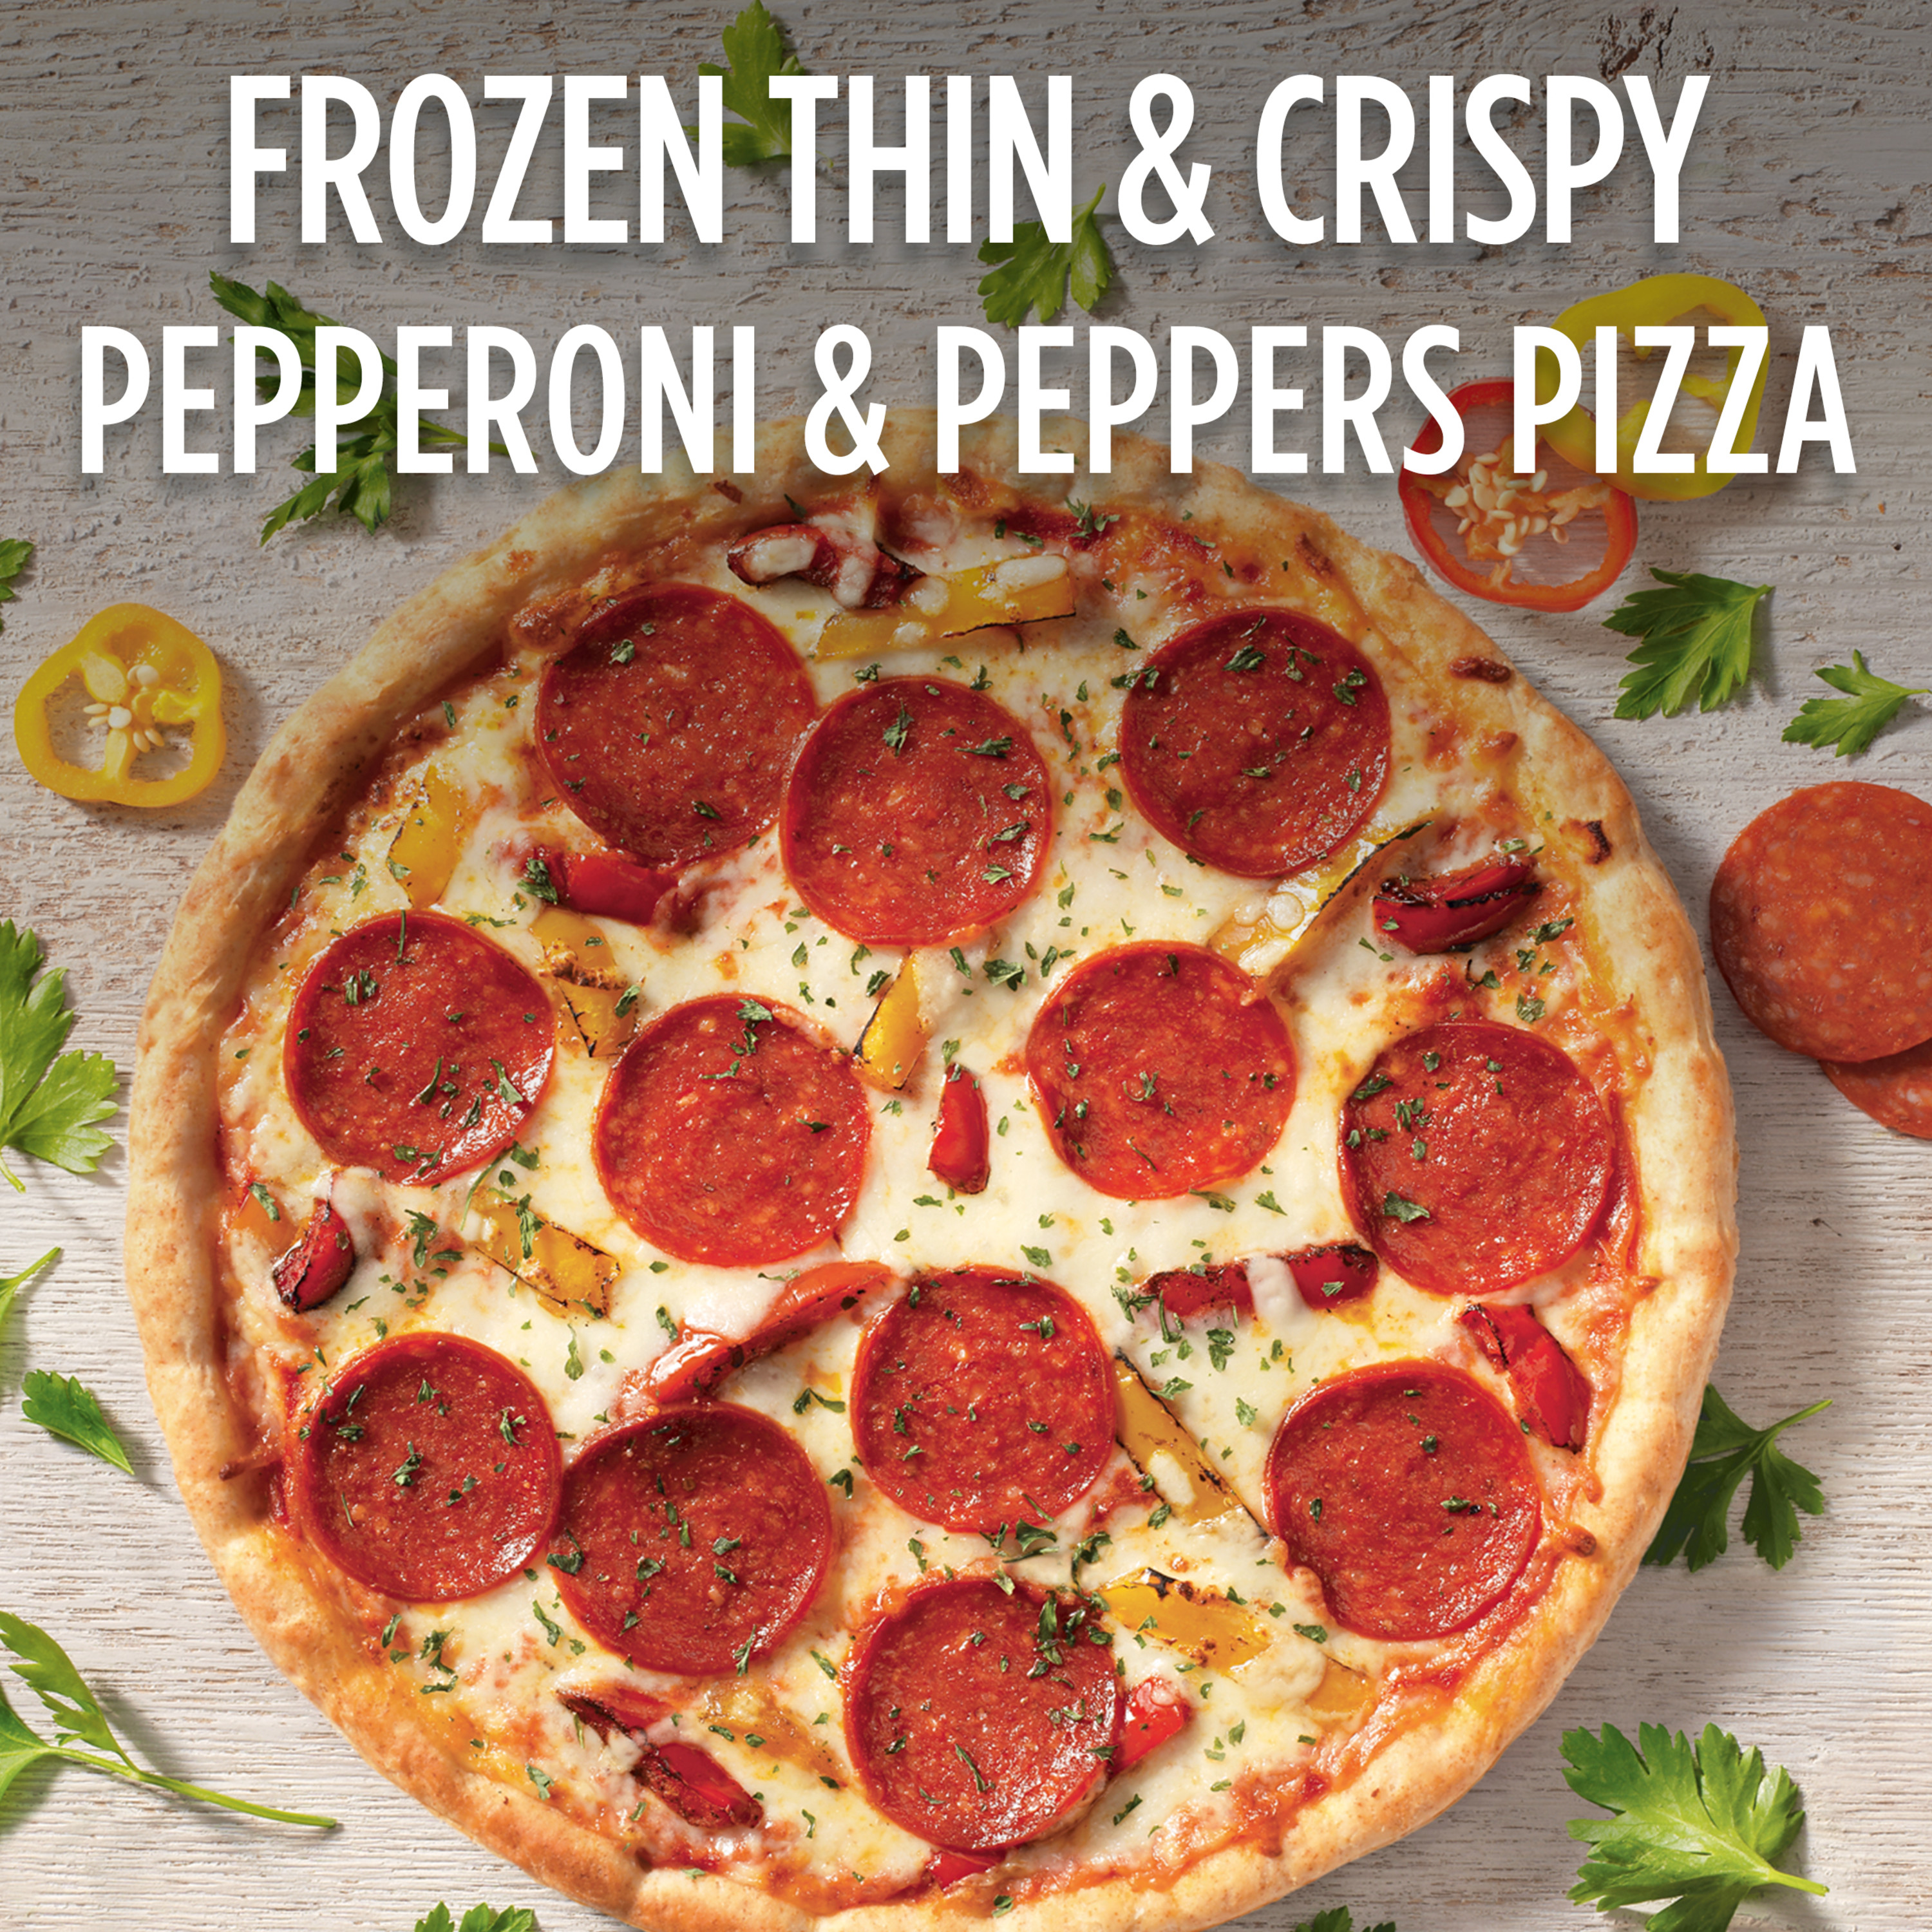 DIGIORNO Pepperoni and Peppers, Thin & Crispy Crust Pizza, 10.6 oz. (Frozen) - image 3 of 7